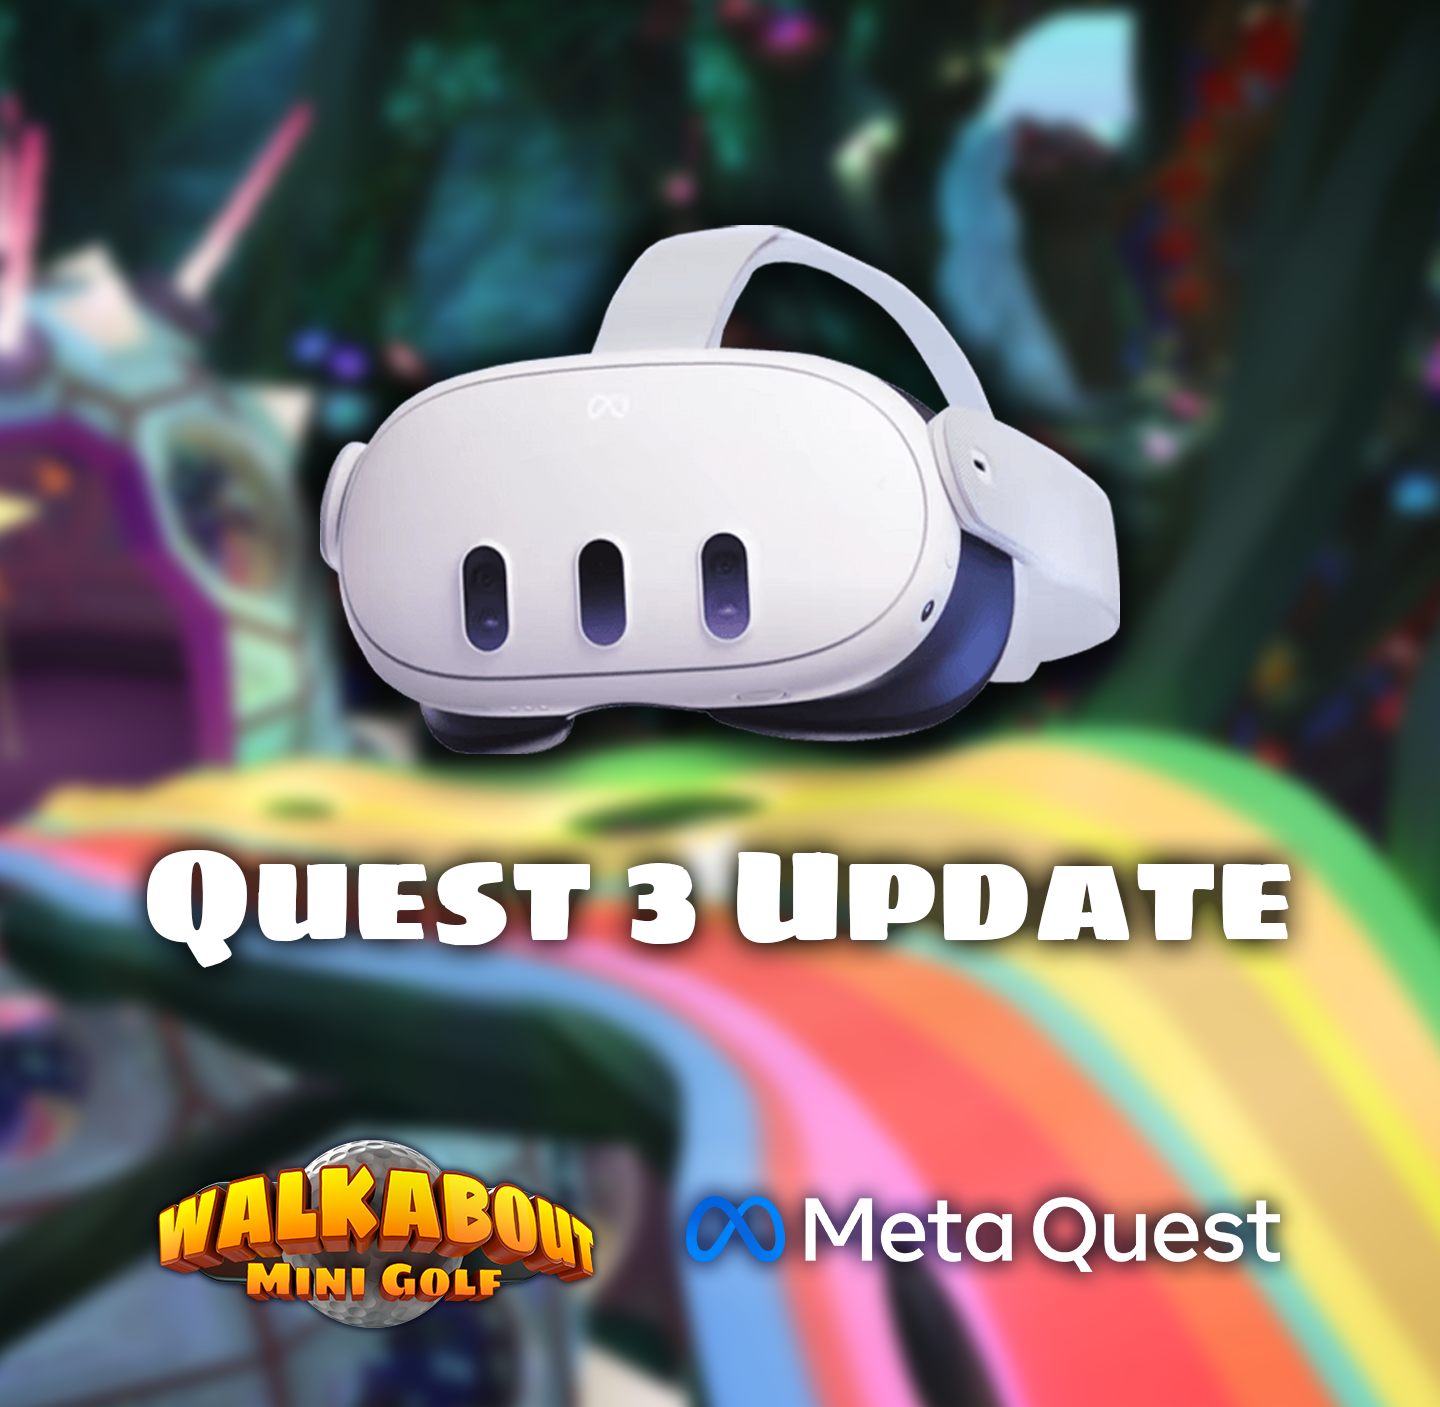 Walkabout Mini Golf Quest 3 Update — Mighty Coconut